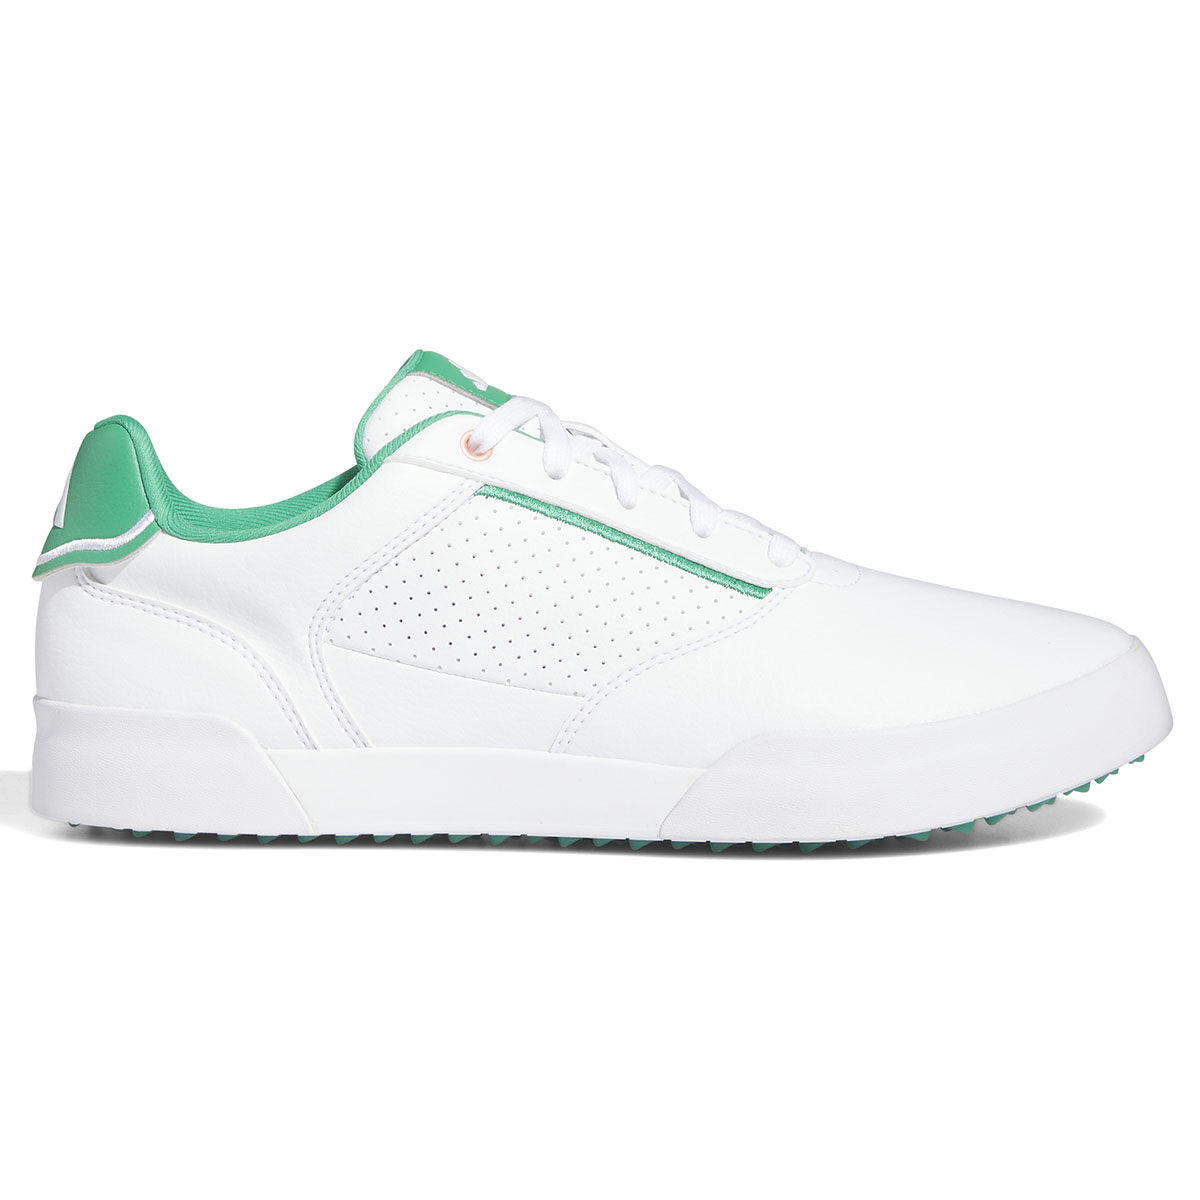 adidas Men’s Retrocross Waterproof Spikeless Golf Shoes, Mens, White/court green/coral fusion, 7 | American Golf